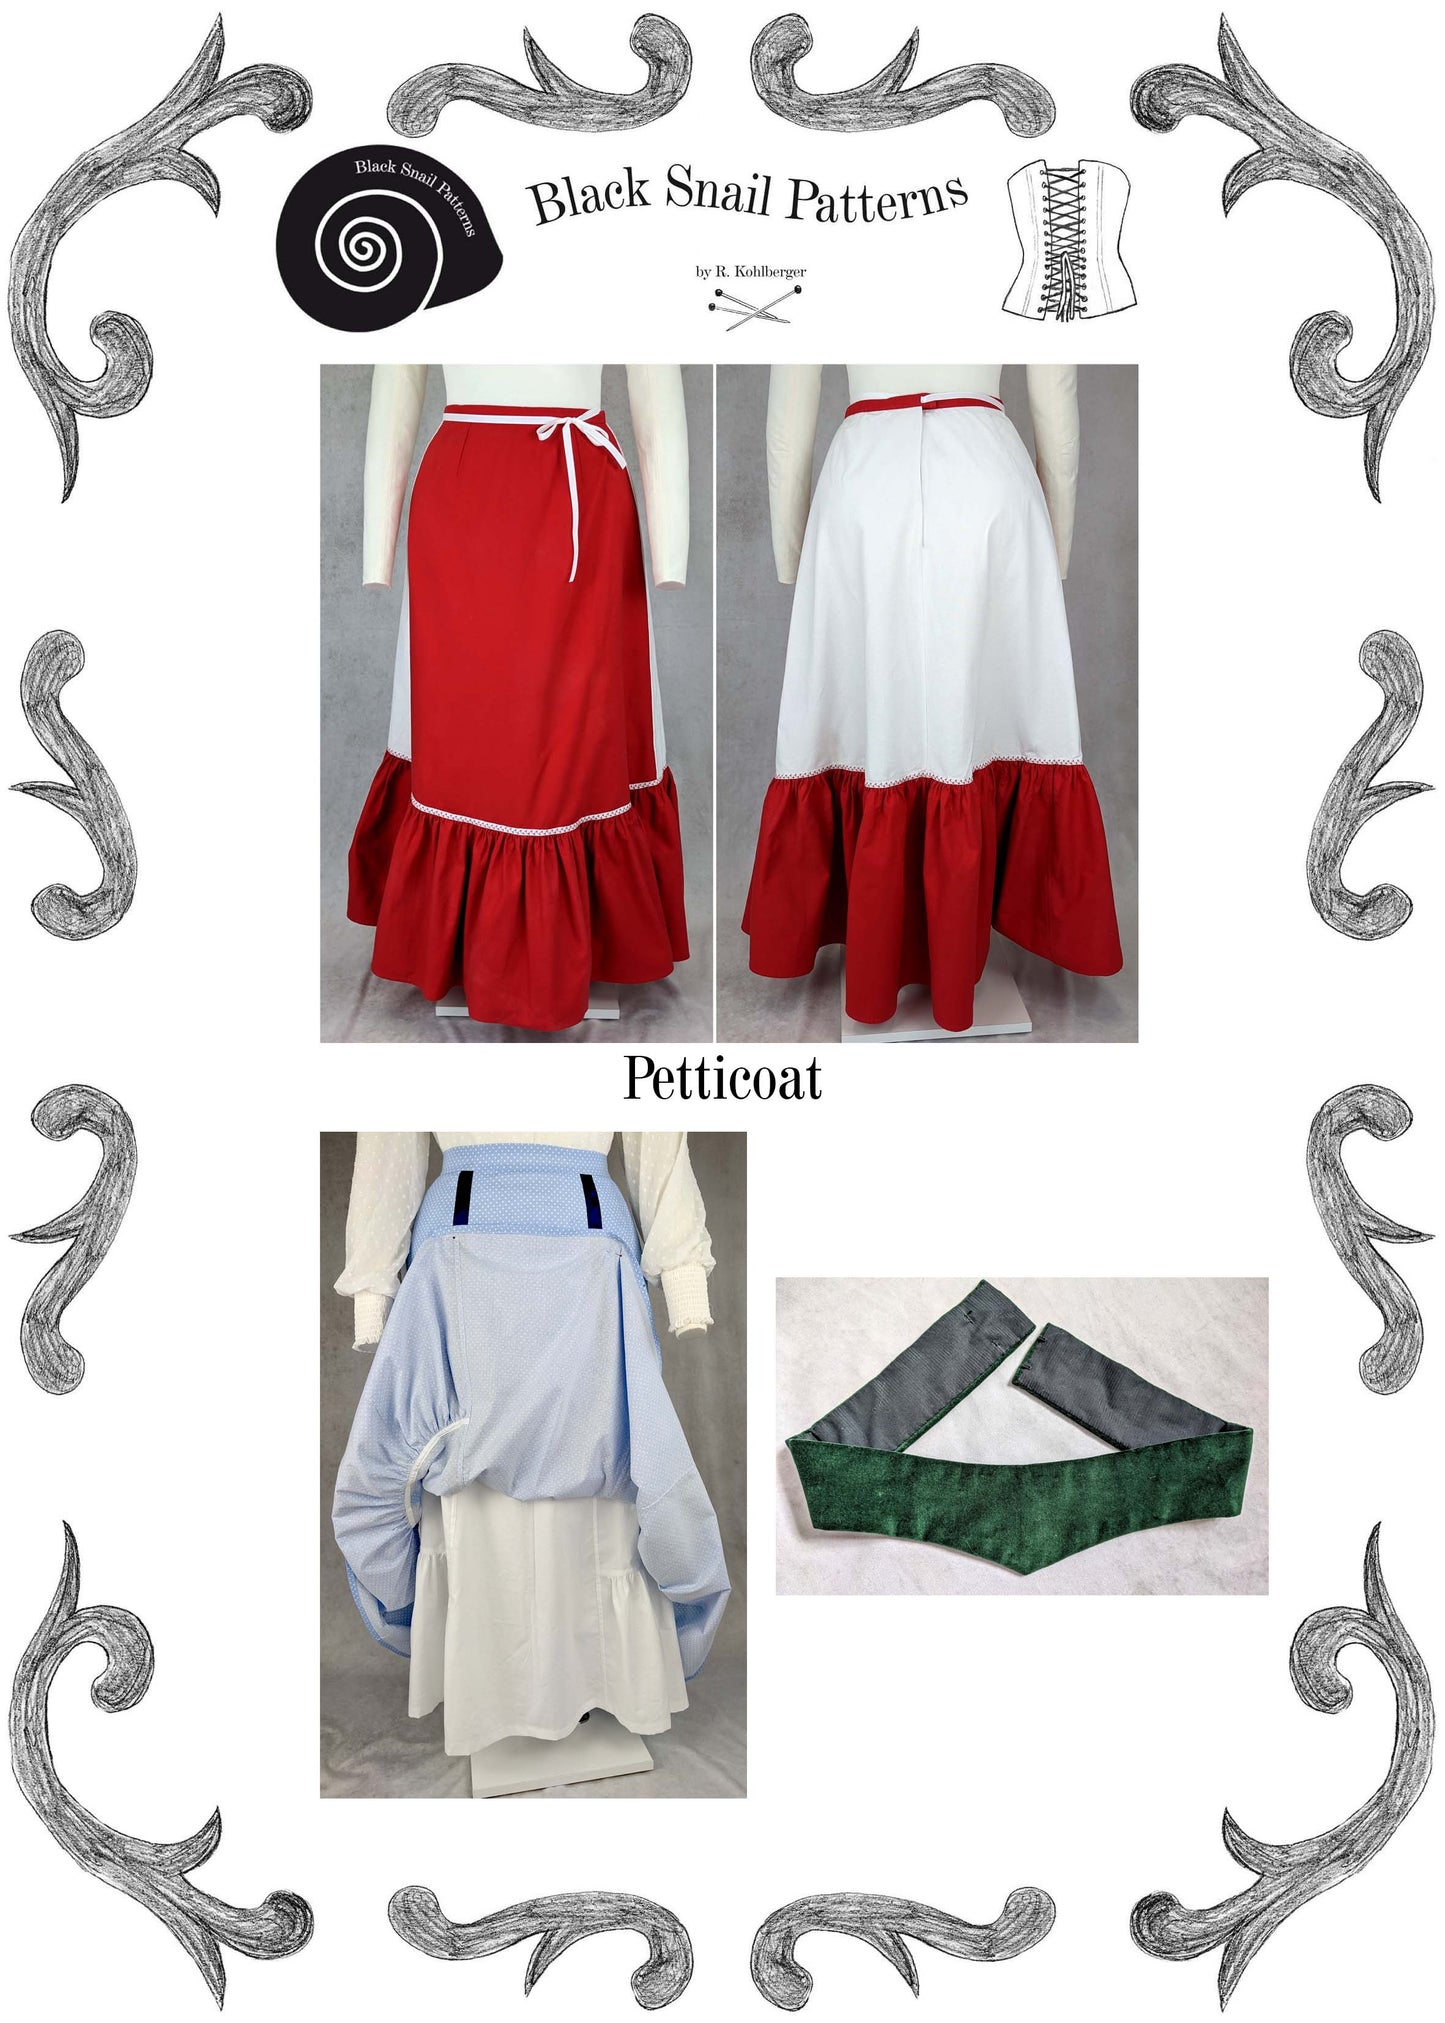 Edwardian Day Skirt and Petticoat from 1890 to 1910 including Belt Sewing Pattern #0916 Size US 8-30 (EU 34-56) PDF Download